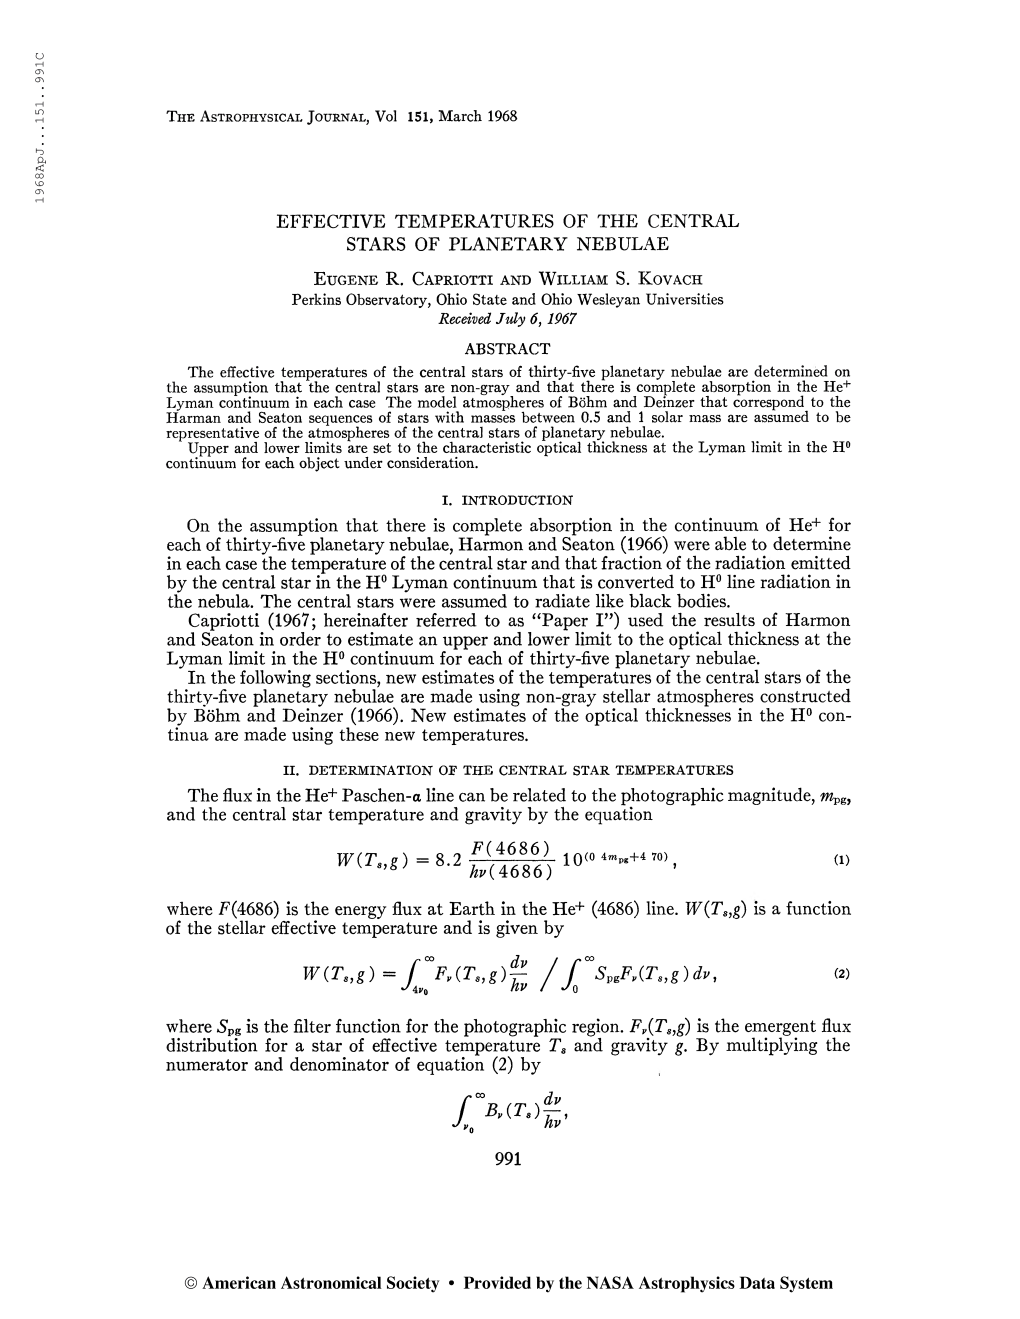 1968Apj. . .151. . 991C the Asteophysical Jouenal, Vol 151, March 1968 EFFECTIVE TEMPERATURES of the CENTRAL STARS of PLANETARY